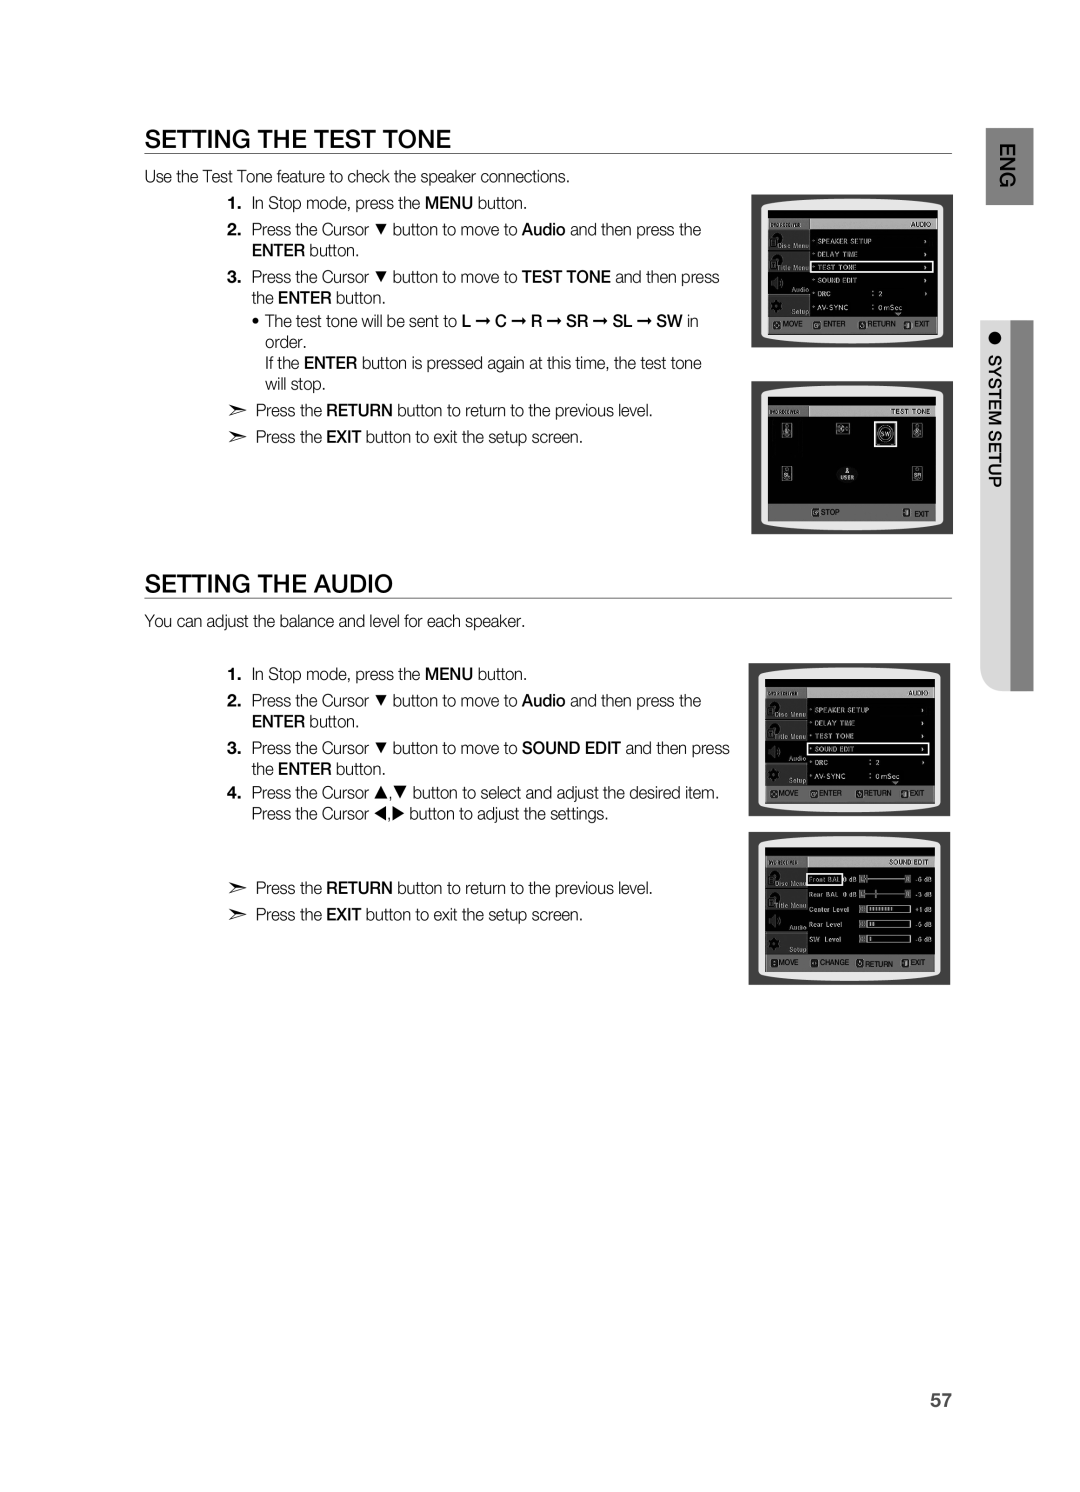 Samsung AH68-02055S manual Setting the Test Tone, Setting the Audio, system 